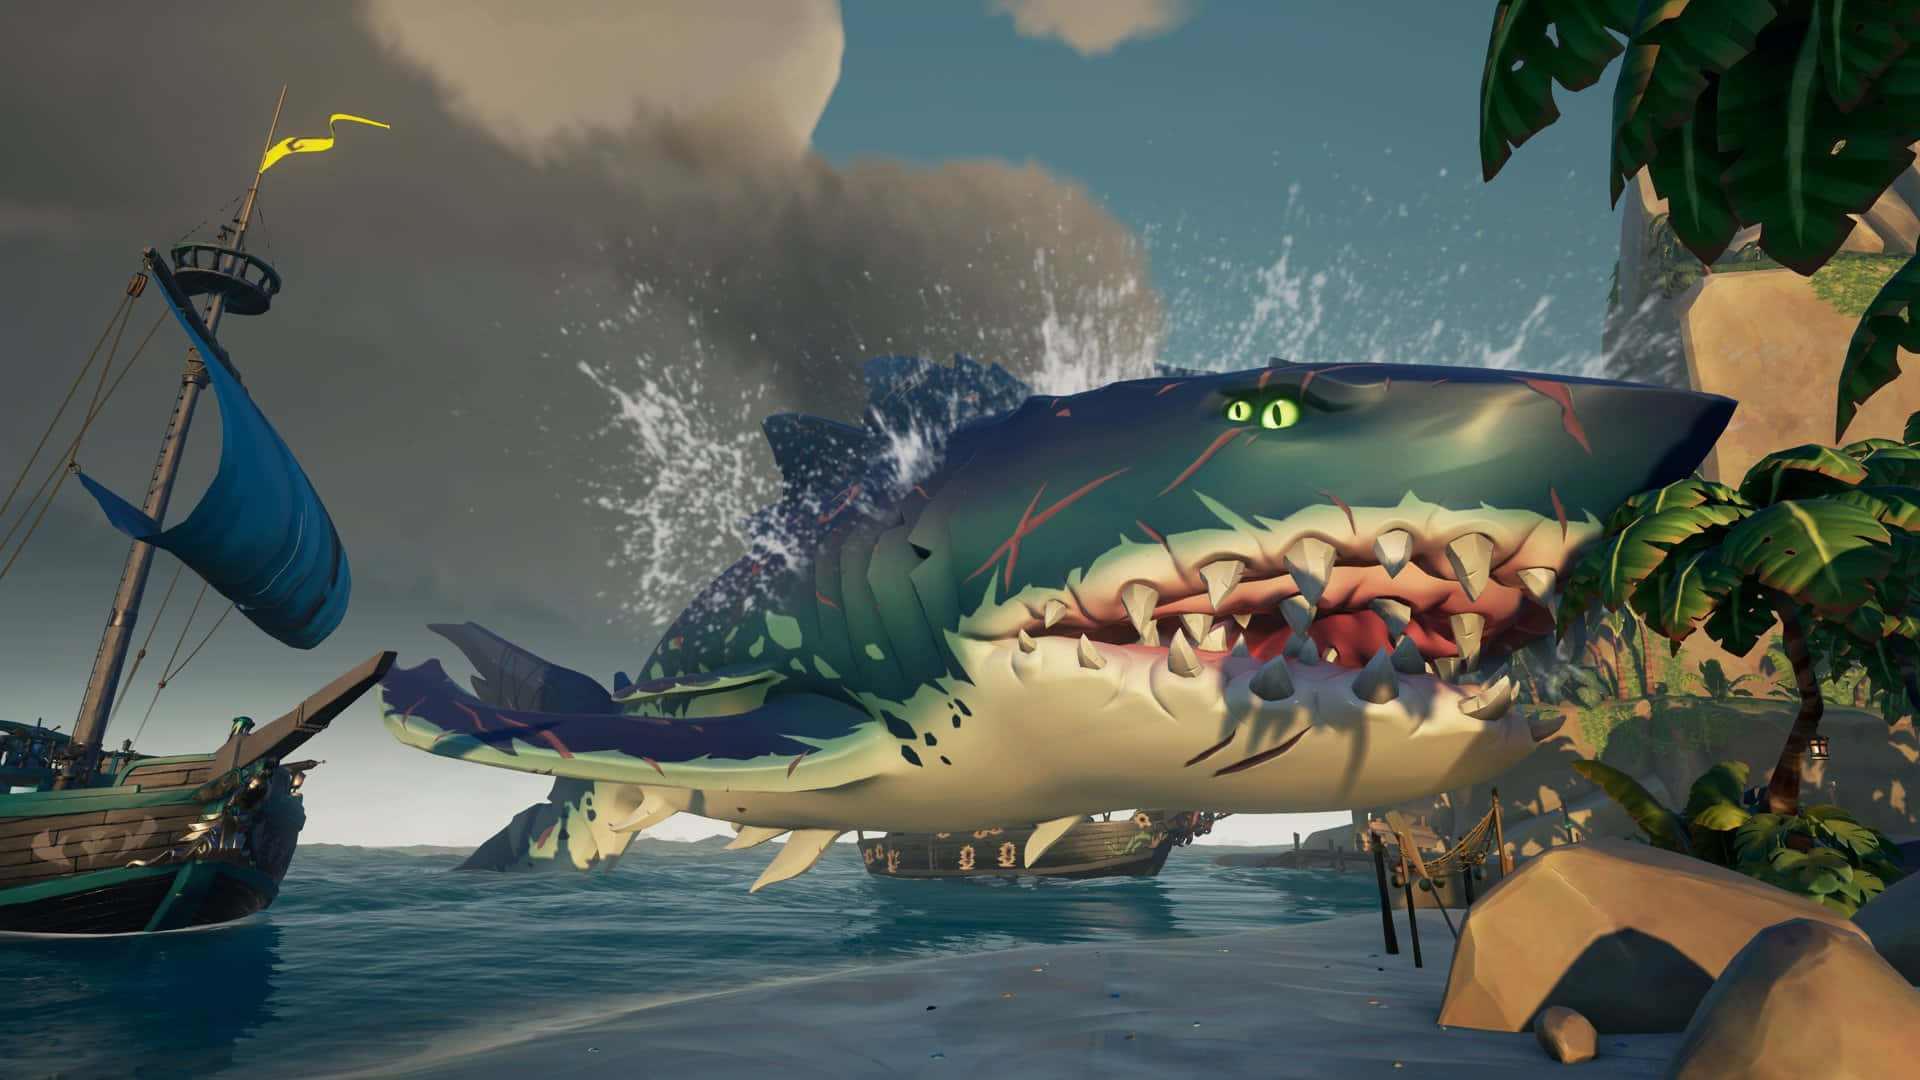 A Shark With Teeth In The Water